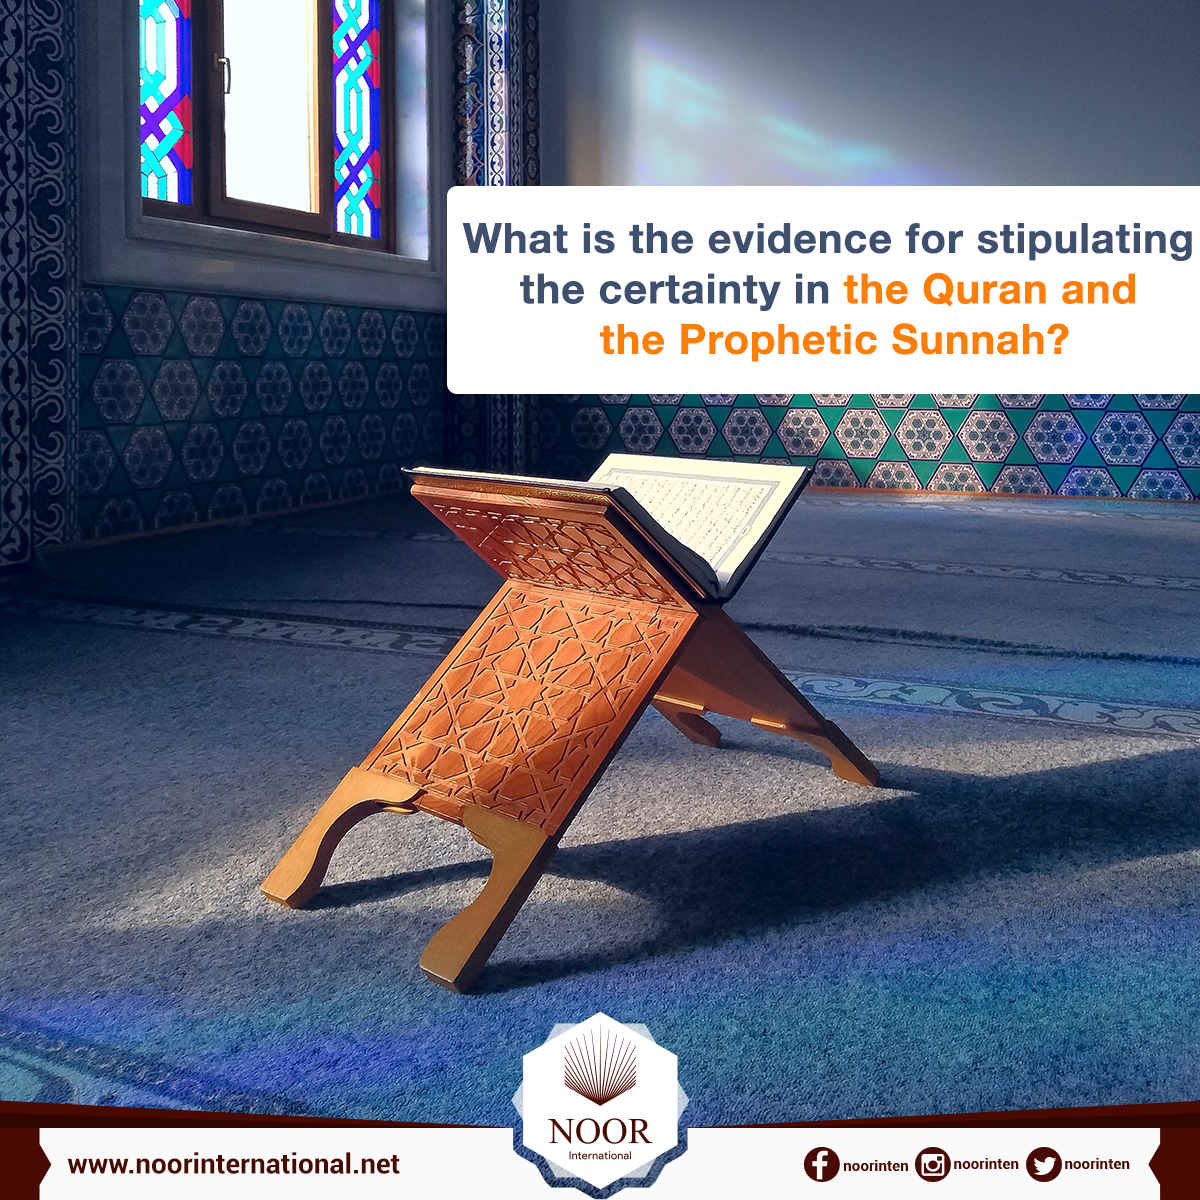 What is the evidence for stipulating the certainty in the Quran and the Prophetic Sunnah?